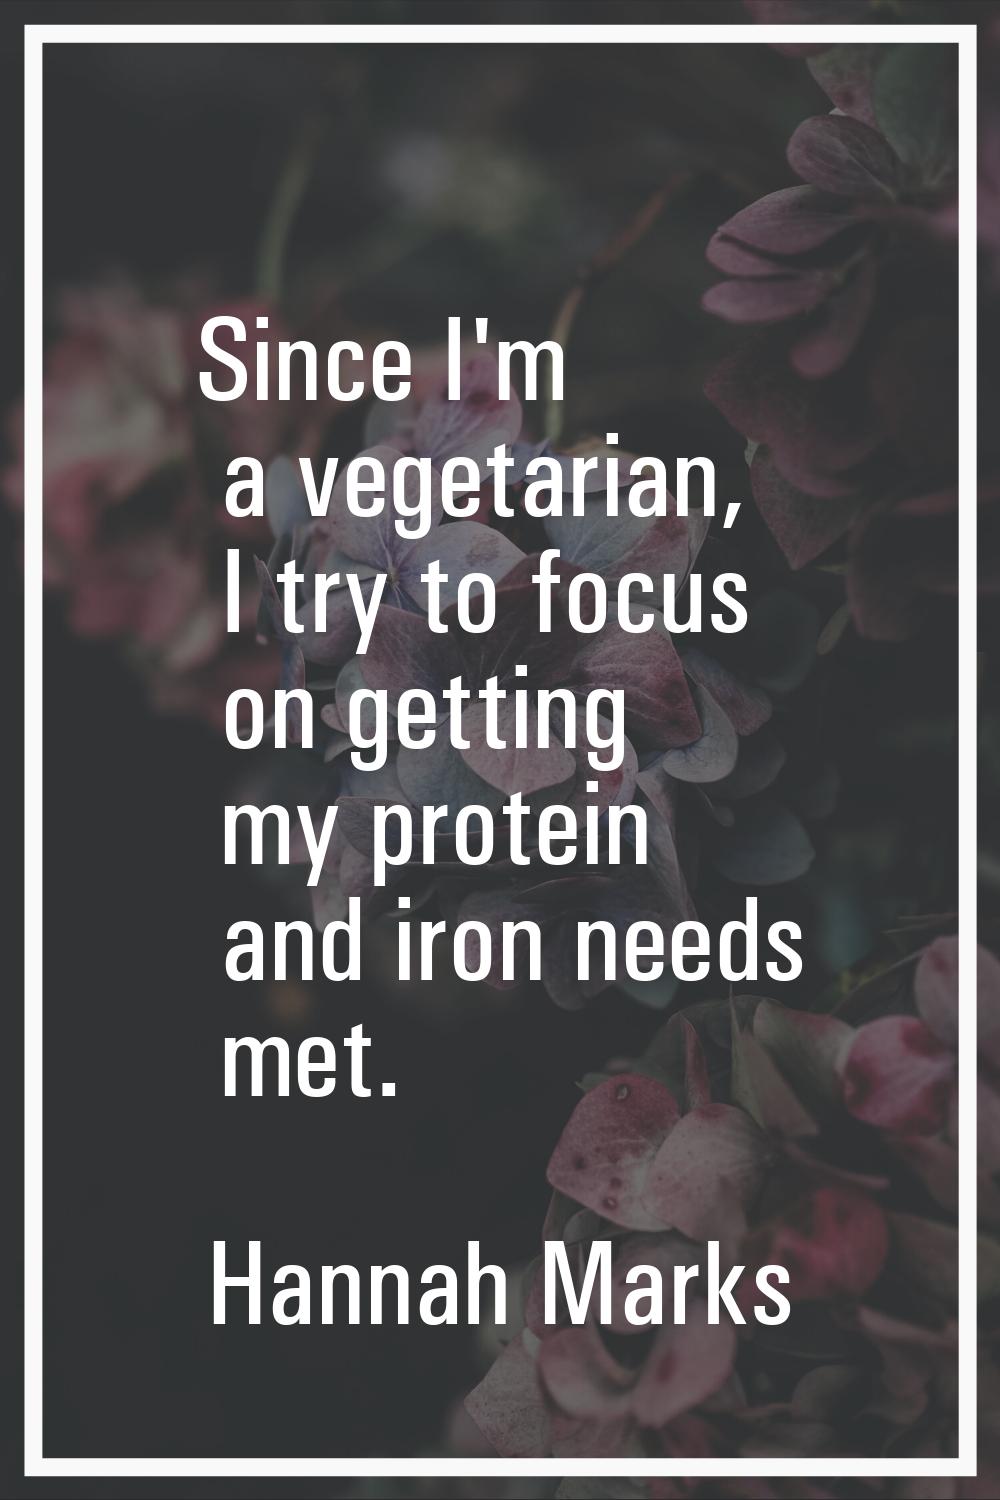 Since I'm a vegetarian, I try to focus on getting my protein and iron needs met.